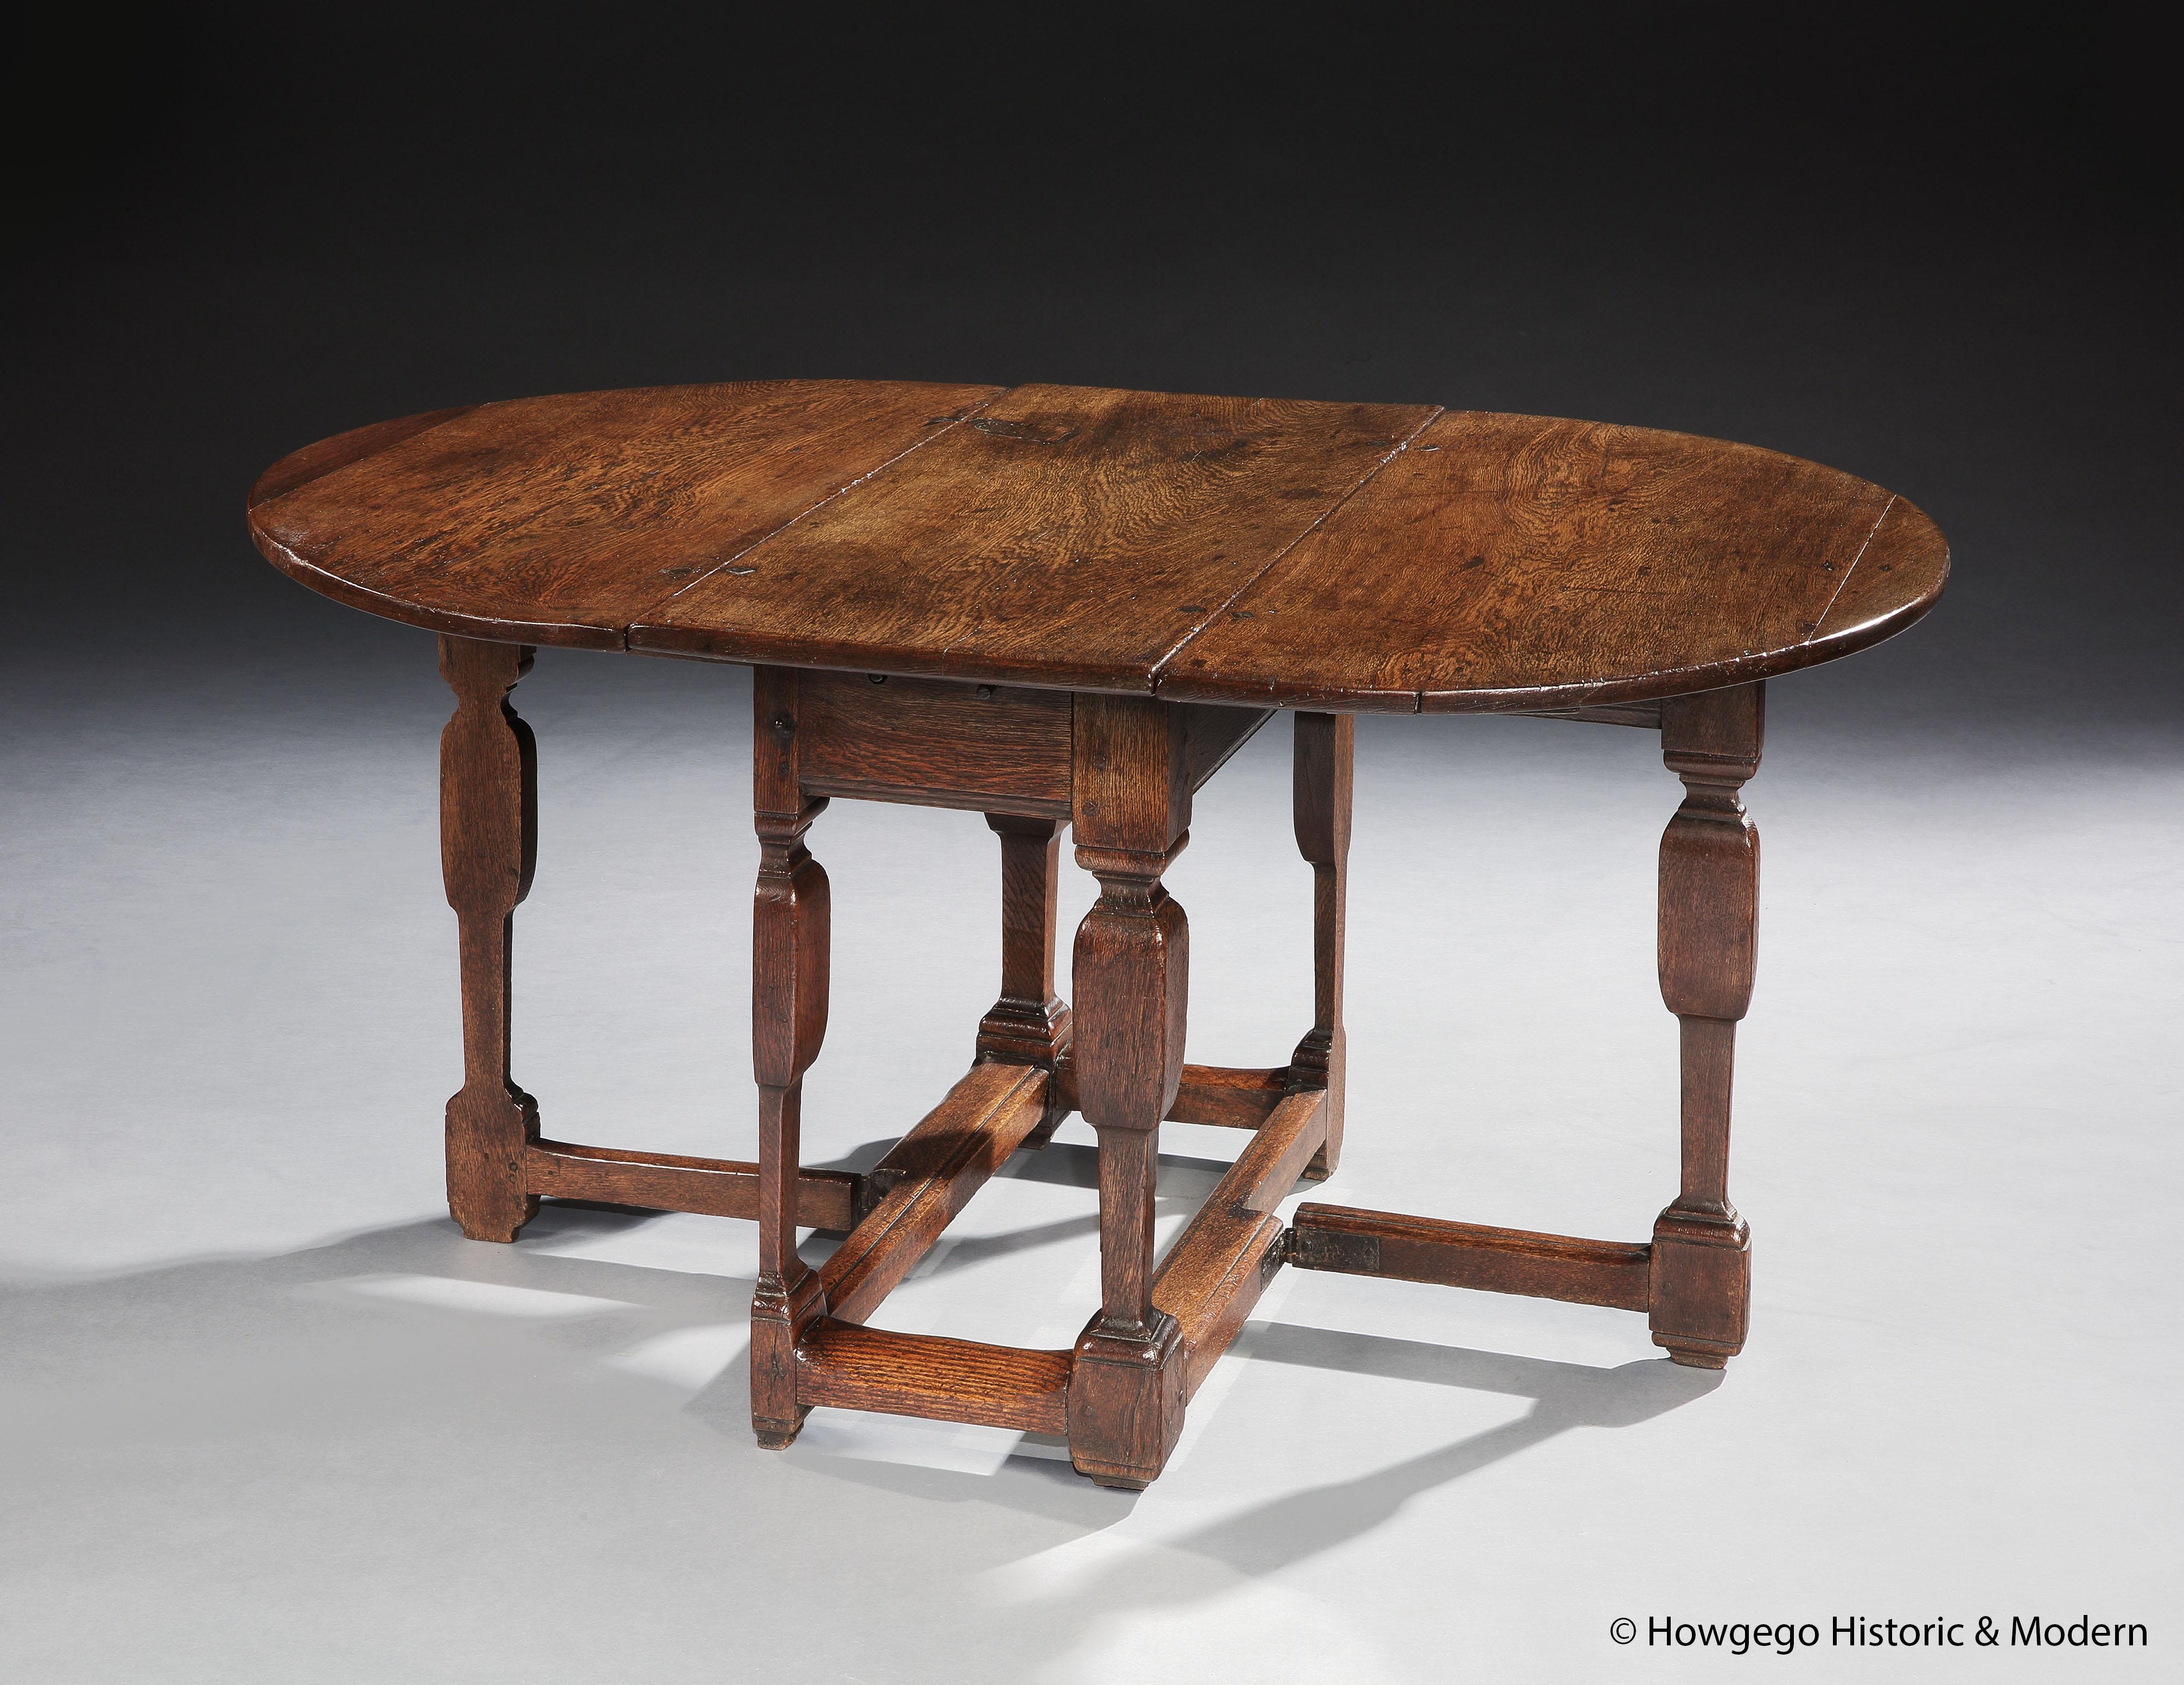 AN UNUSUAL, FLEMISH, BAROQUE, OAK, SPLIT, GATELEG, OVAL TABLE WITH ORIGINAL IRONWORK & SINGLE DRAWER, 5ft

- The turnings are architecturally inspired and the split leg creates a pared down, elegant silhouette
- Characterful table oozing Flemish